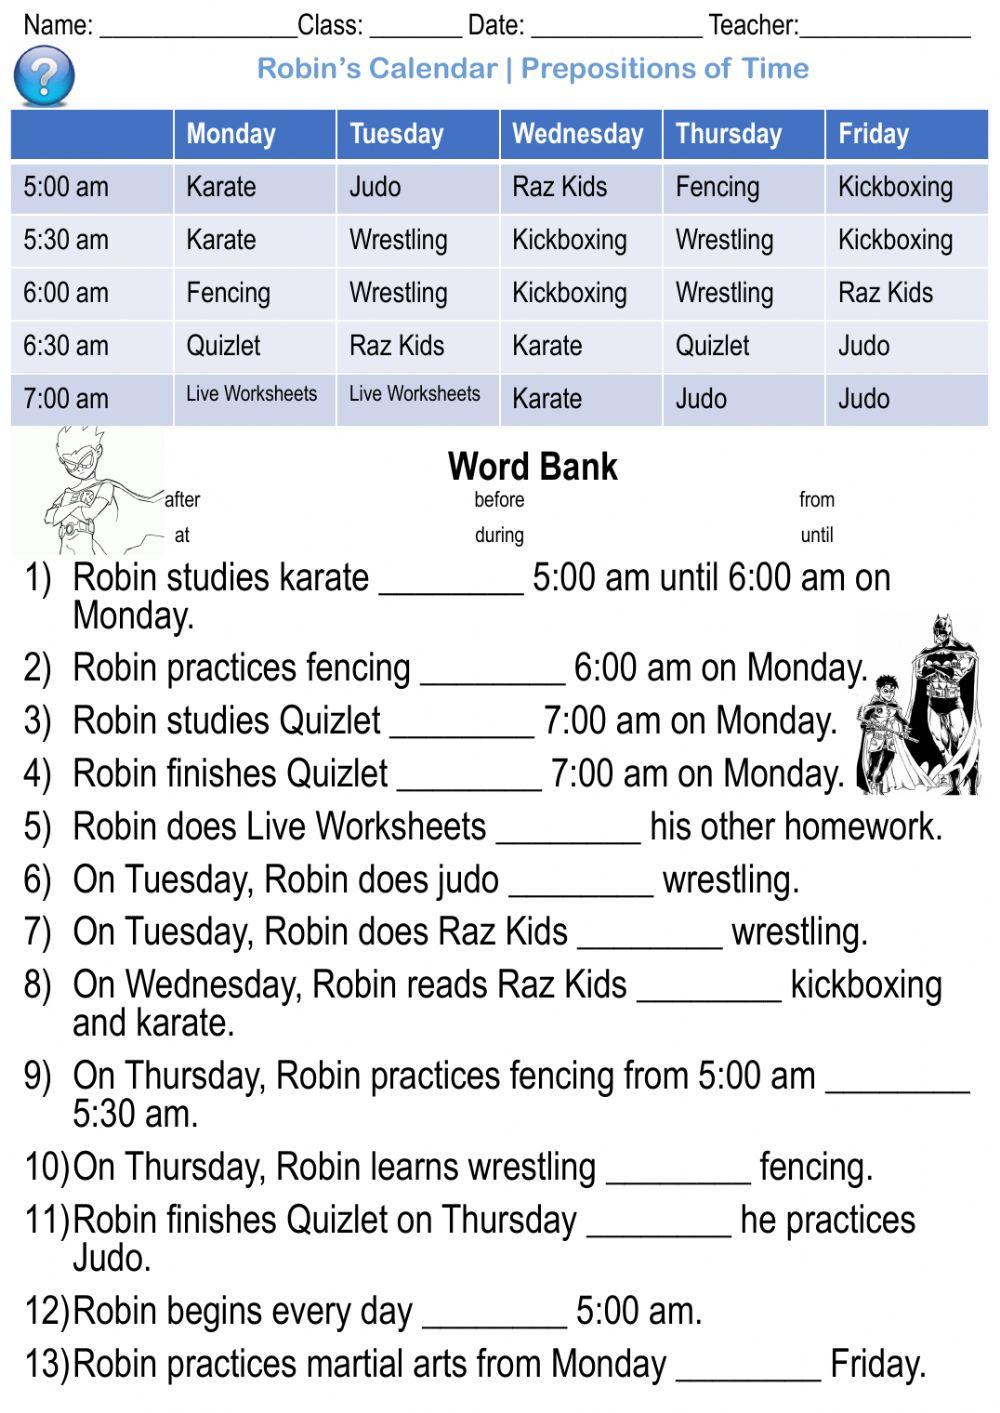 Robin's Schedule - Prepositions of time